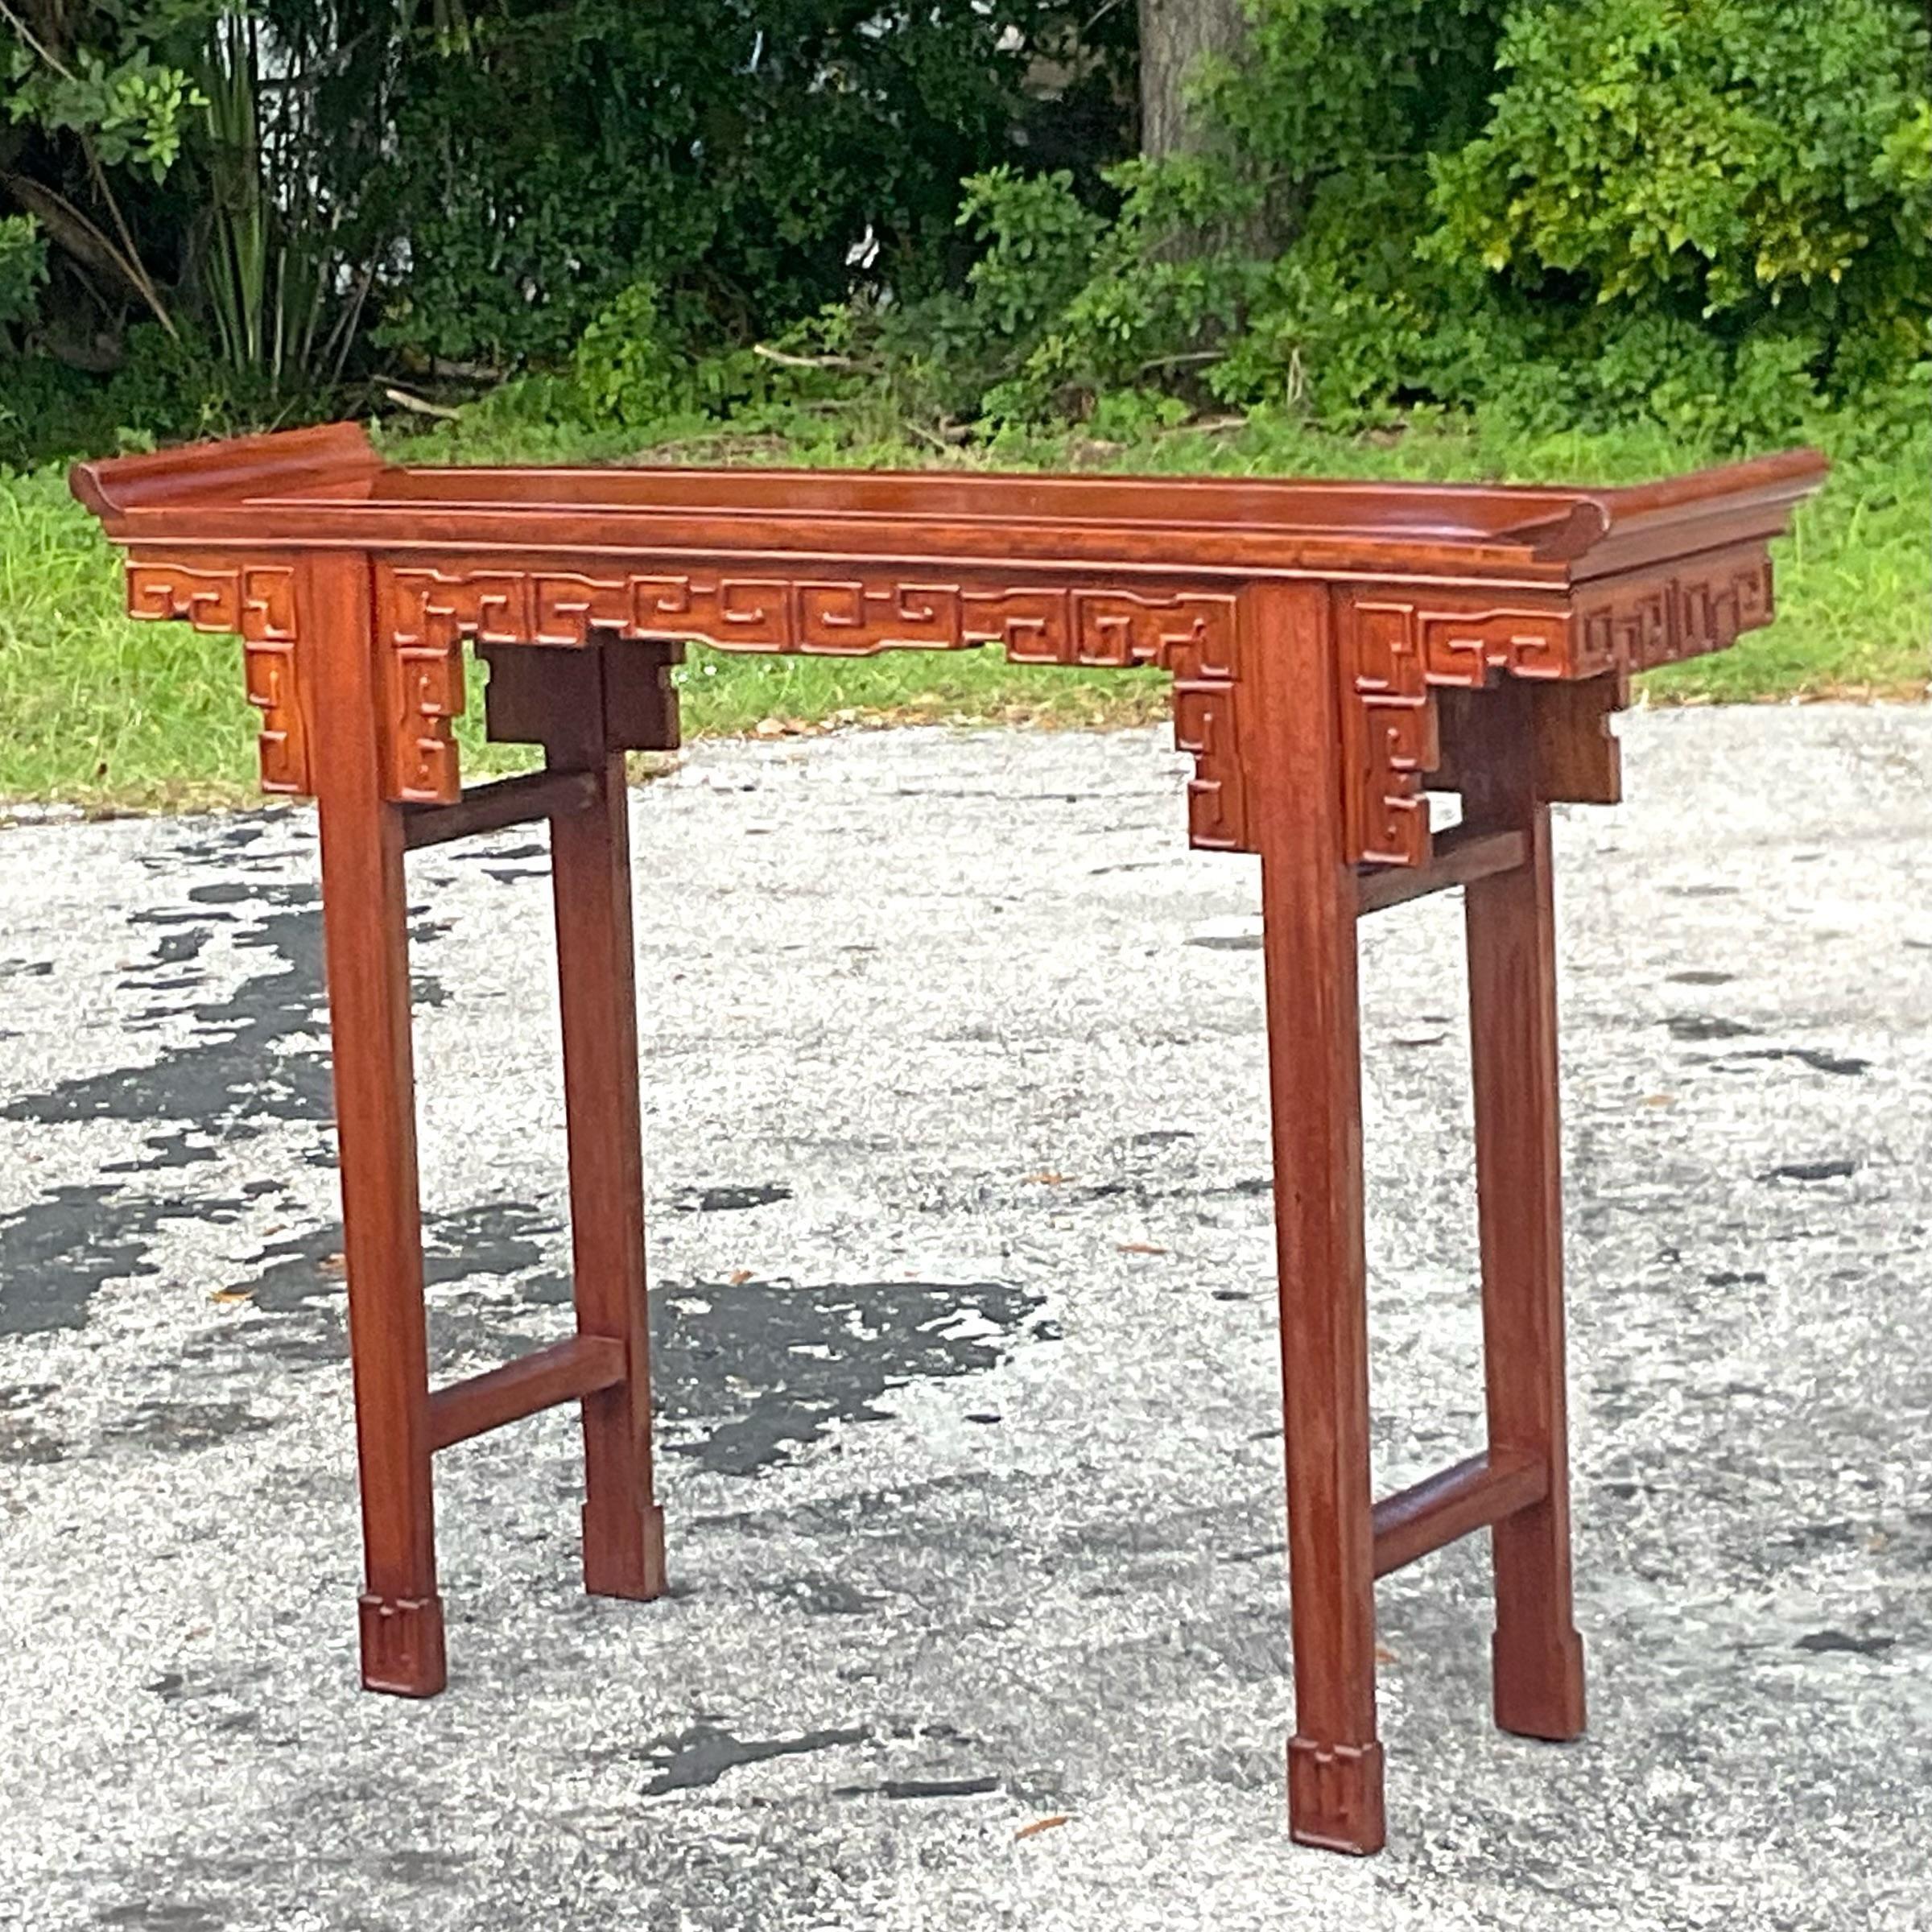 Beautiful vintage chinoiserie altar table with intricate details in the wood and the classic winged curved sides. Perfect to add an element of sophistication and collection to any space. Acquired from a Palm Beach Estate.